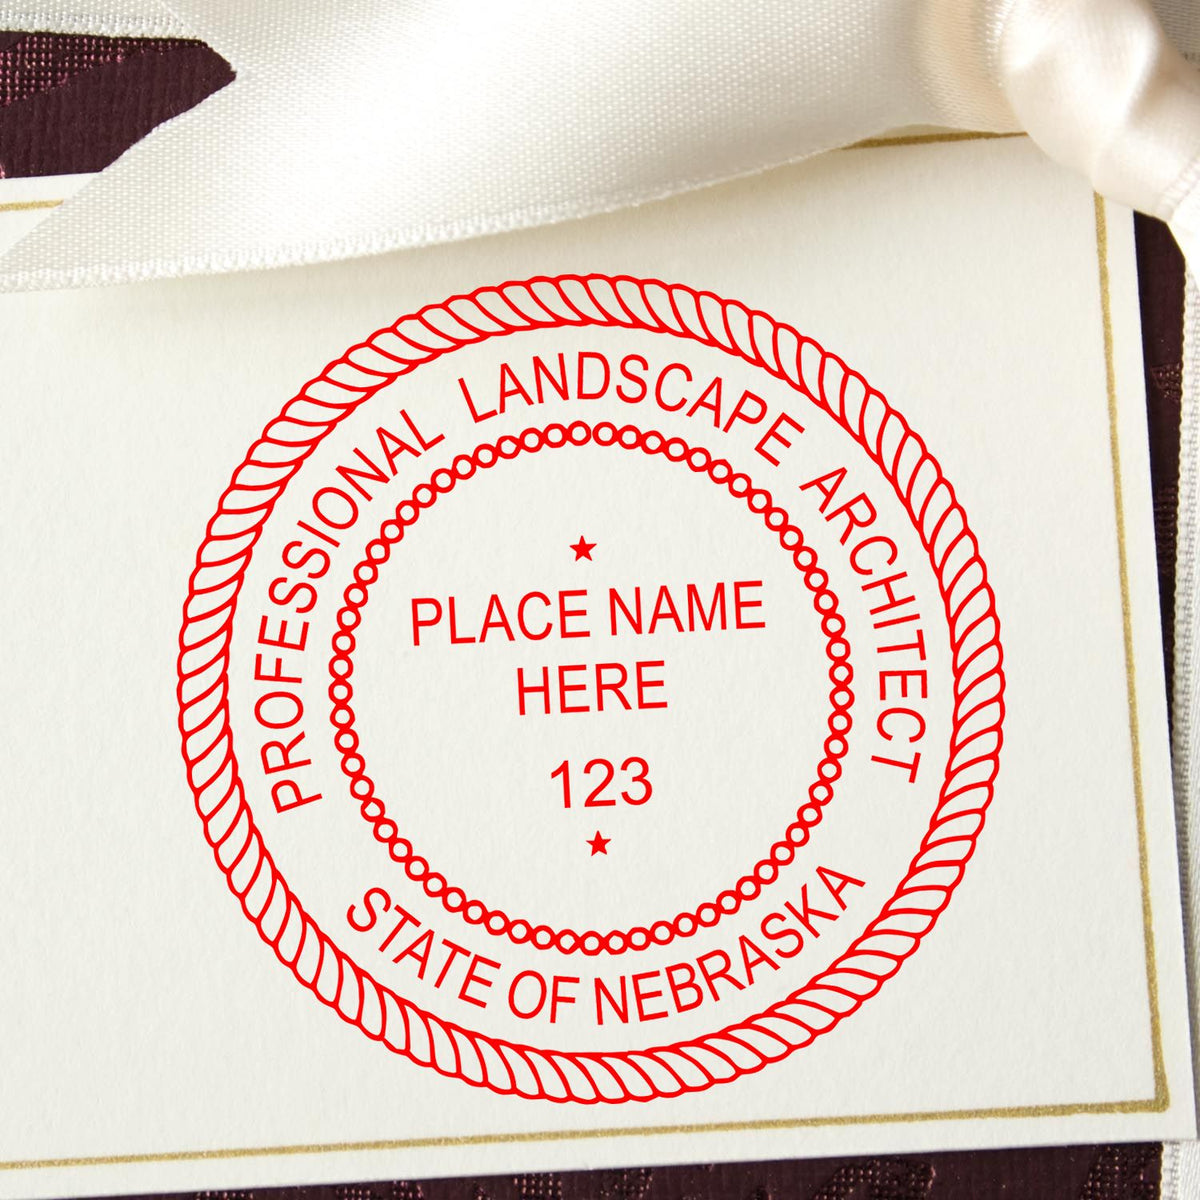 A stamped impression of the Slim Pre-Inked Nebraska Landscape Architect Seal Stamp in this stylish lifestyle photo, setting the tone for a unique and personalized product.